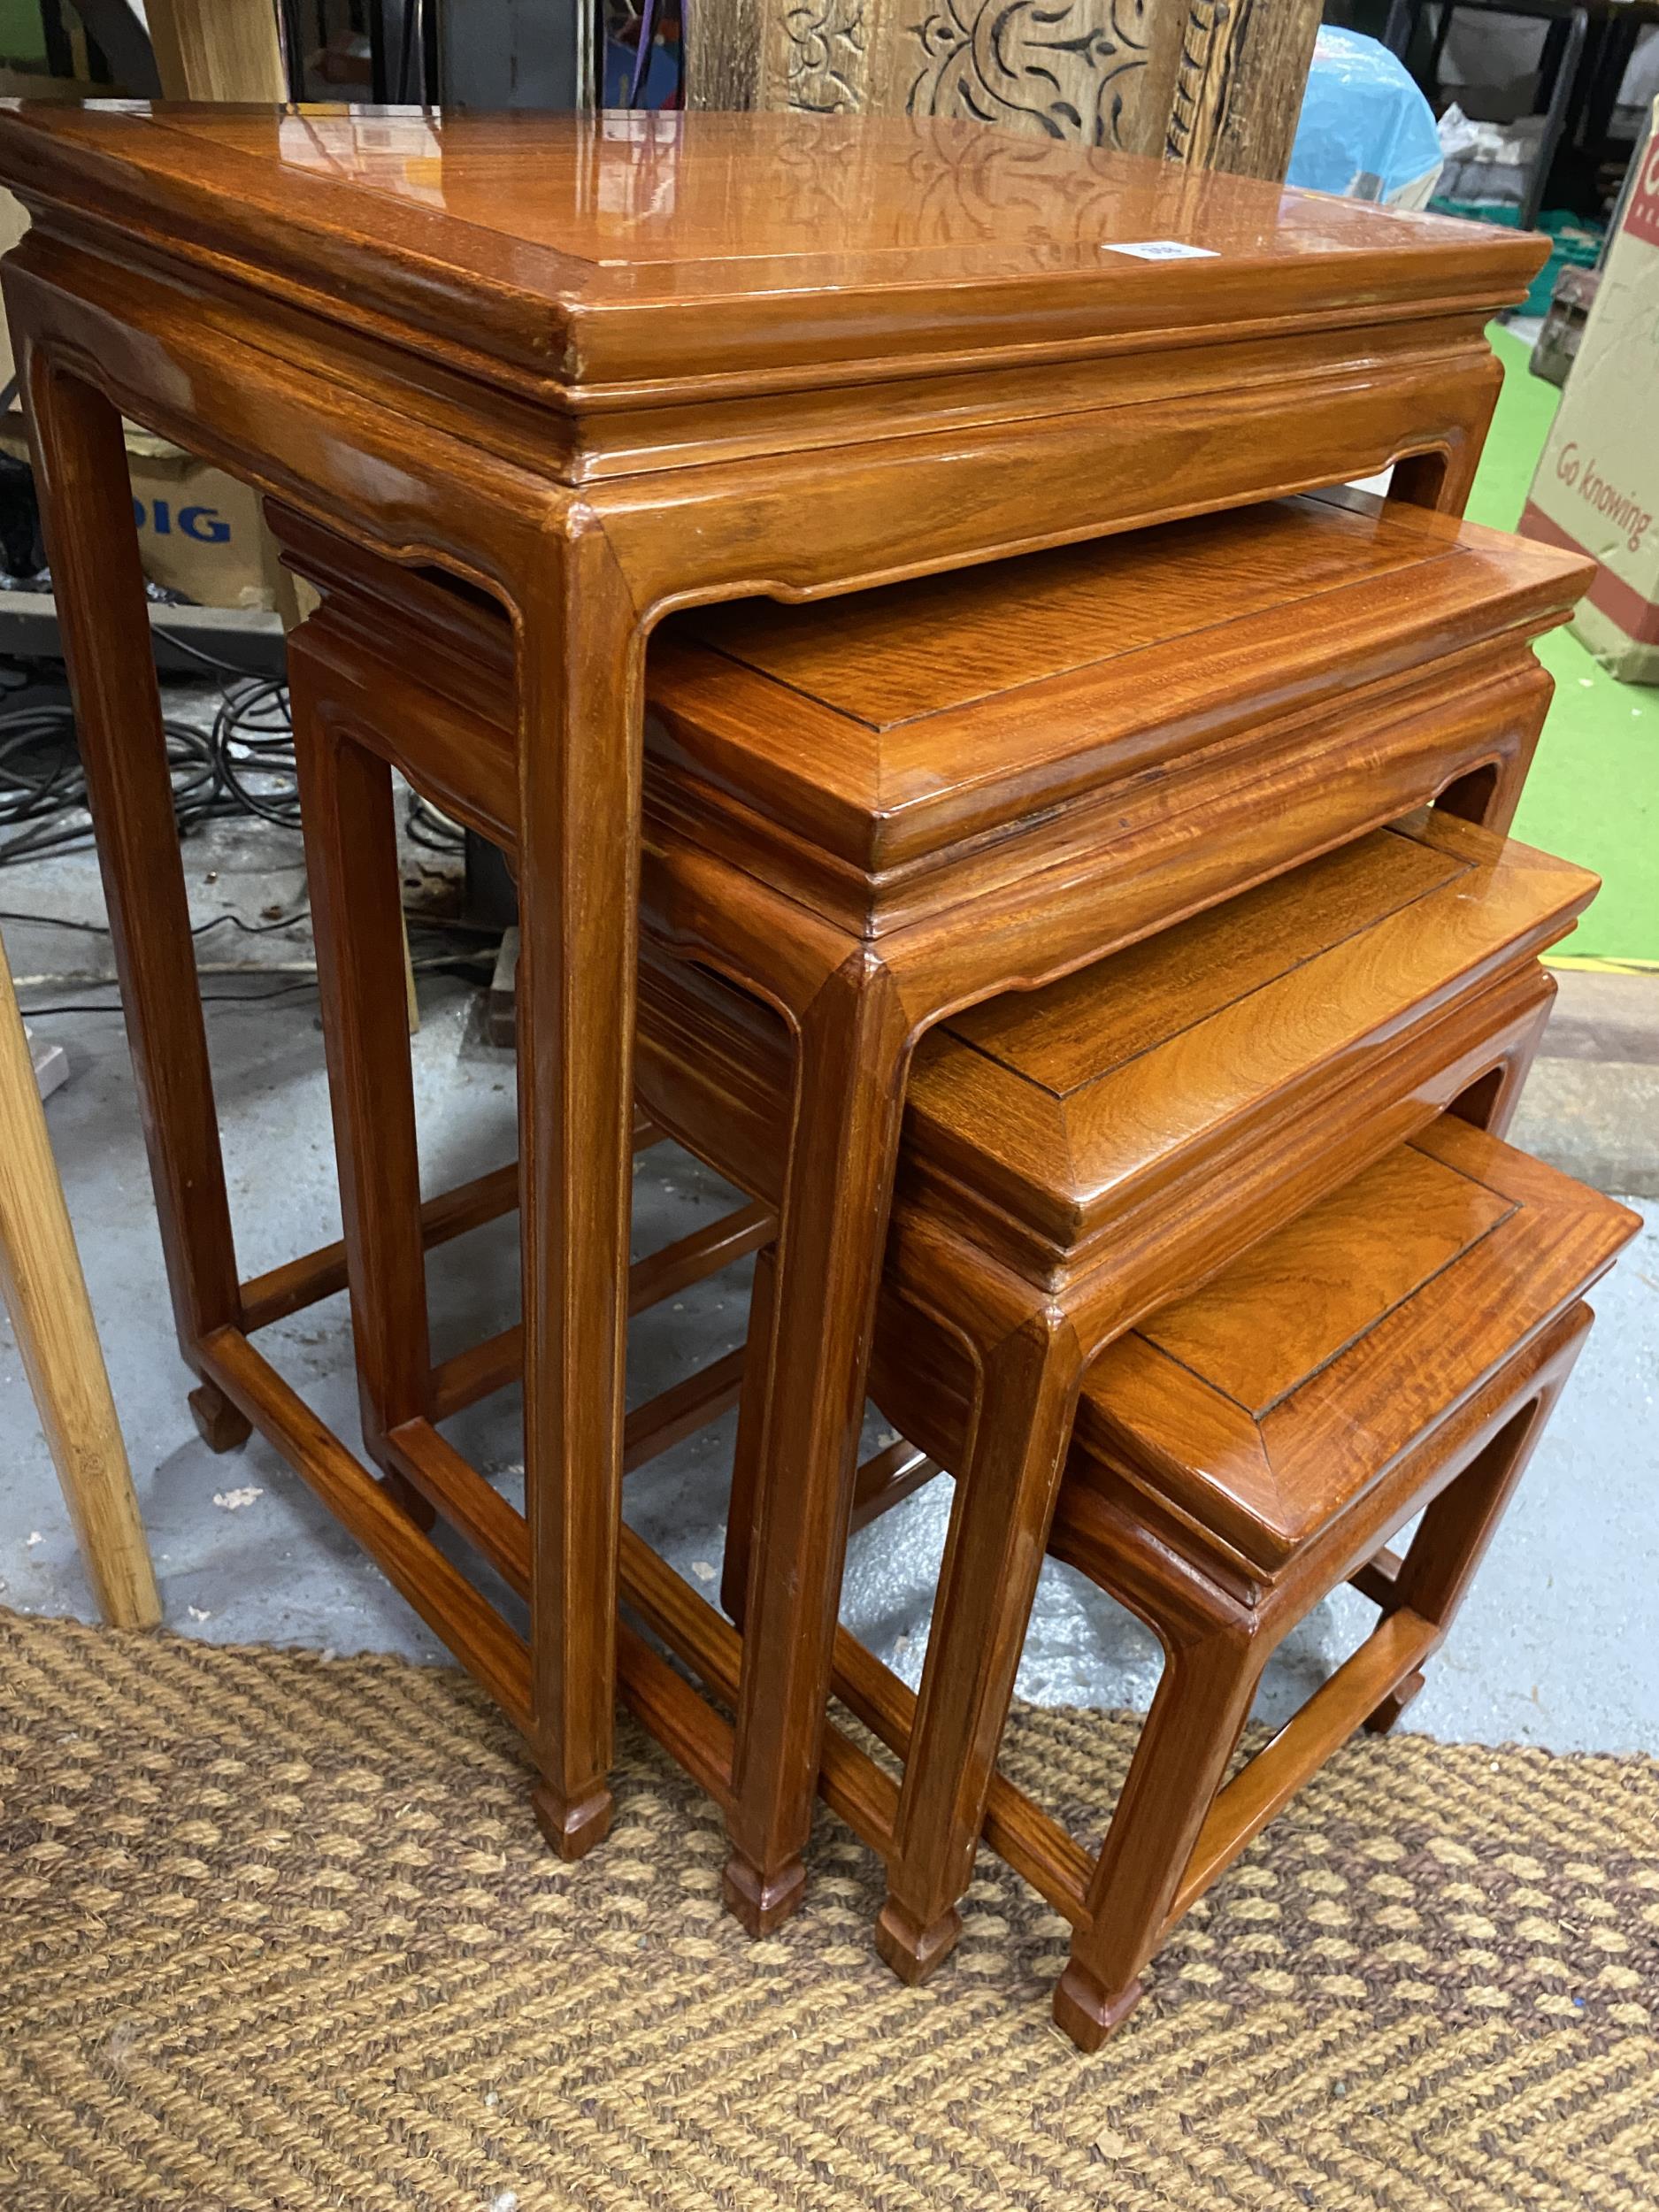 A SET OF FOUR CHINESE YEW WOOD NEST OF TABLES, 65 X 50 X 34.5CM - Image 3 of 3